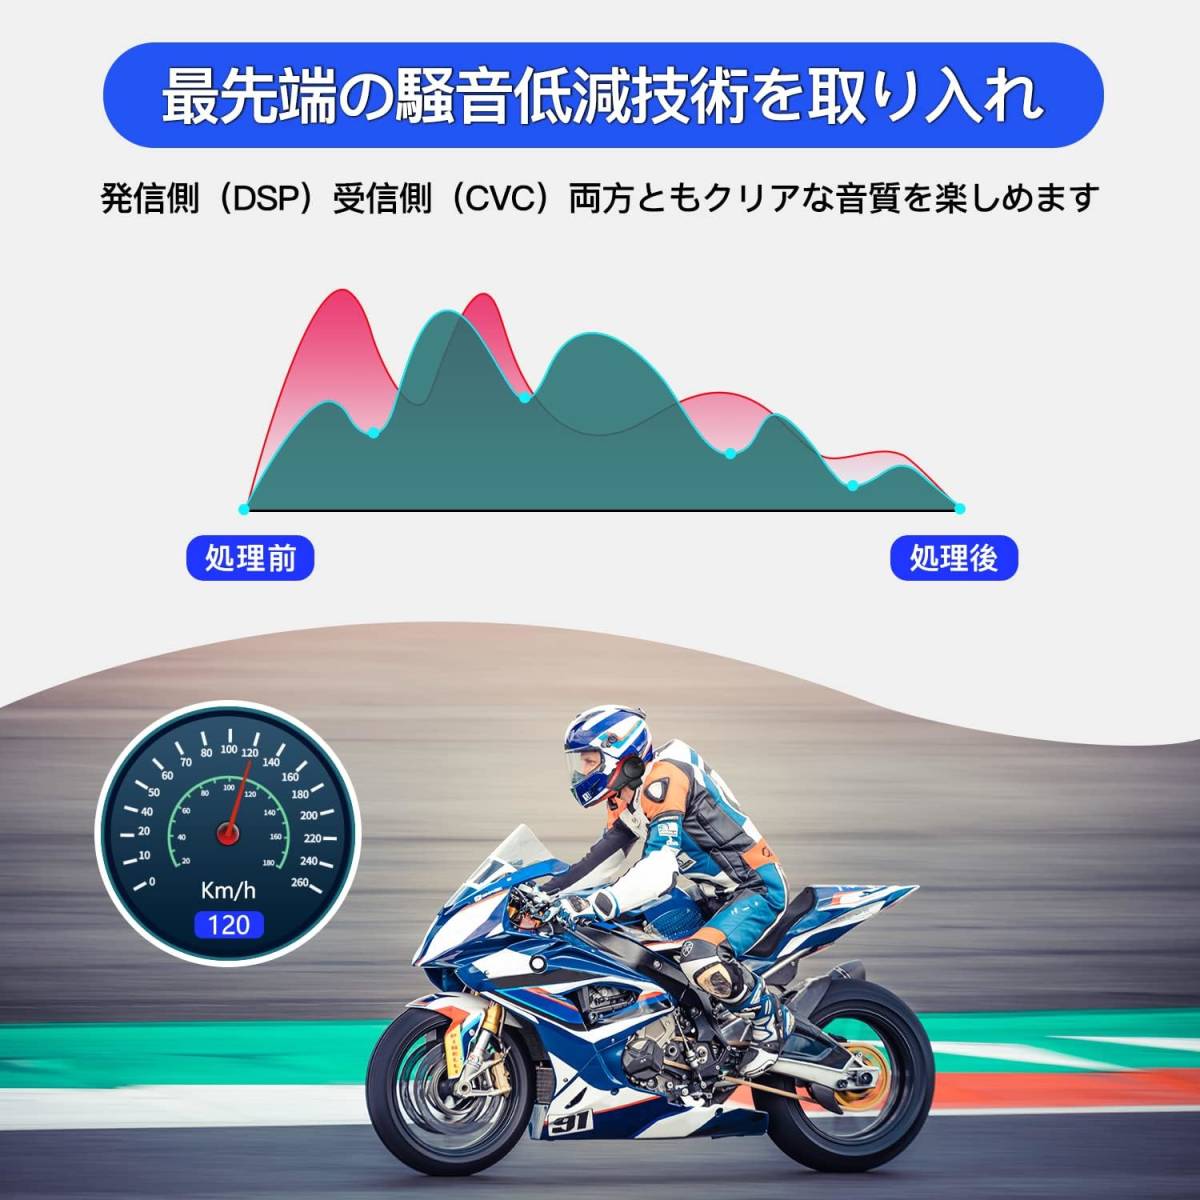  bike in cam red 10 person same time telephone call maximum telephone call distance 2000m Bluetooth5.0 transceiver bike continuation 28H hour telephone call IP67 waterproof 